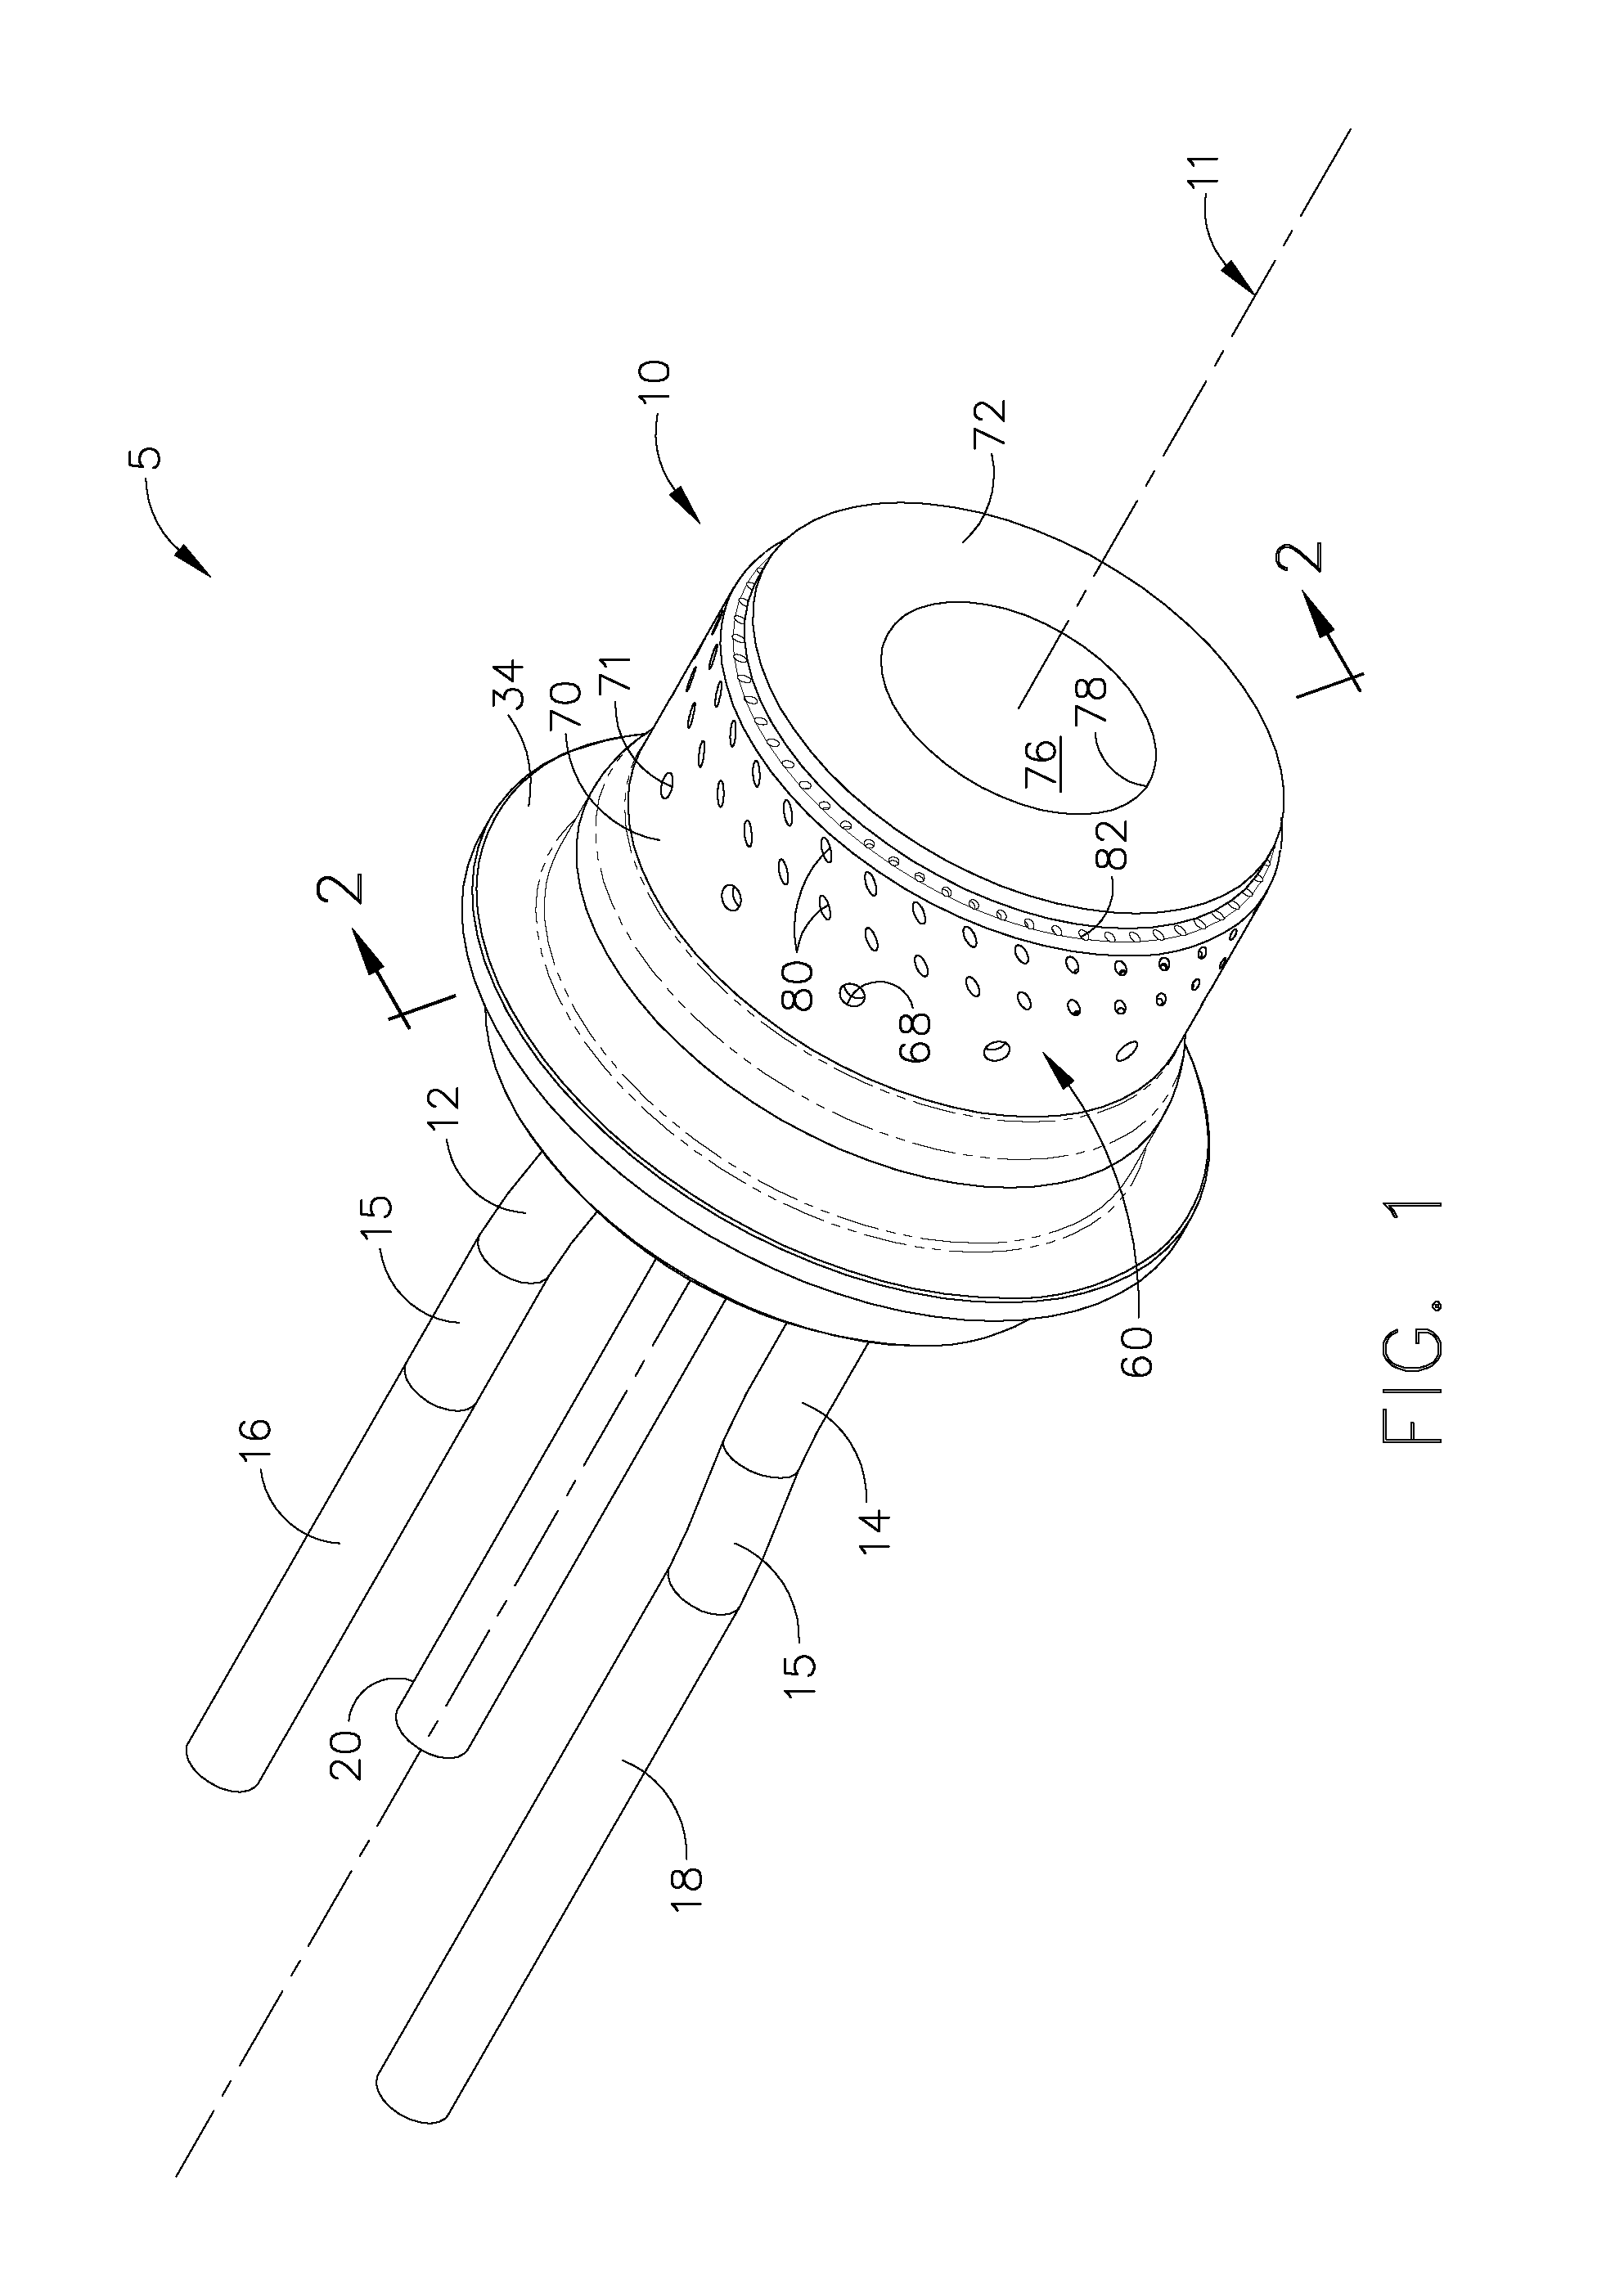 Method of manufacturing combustor components